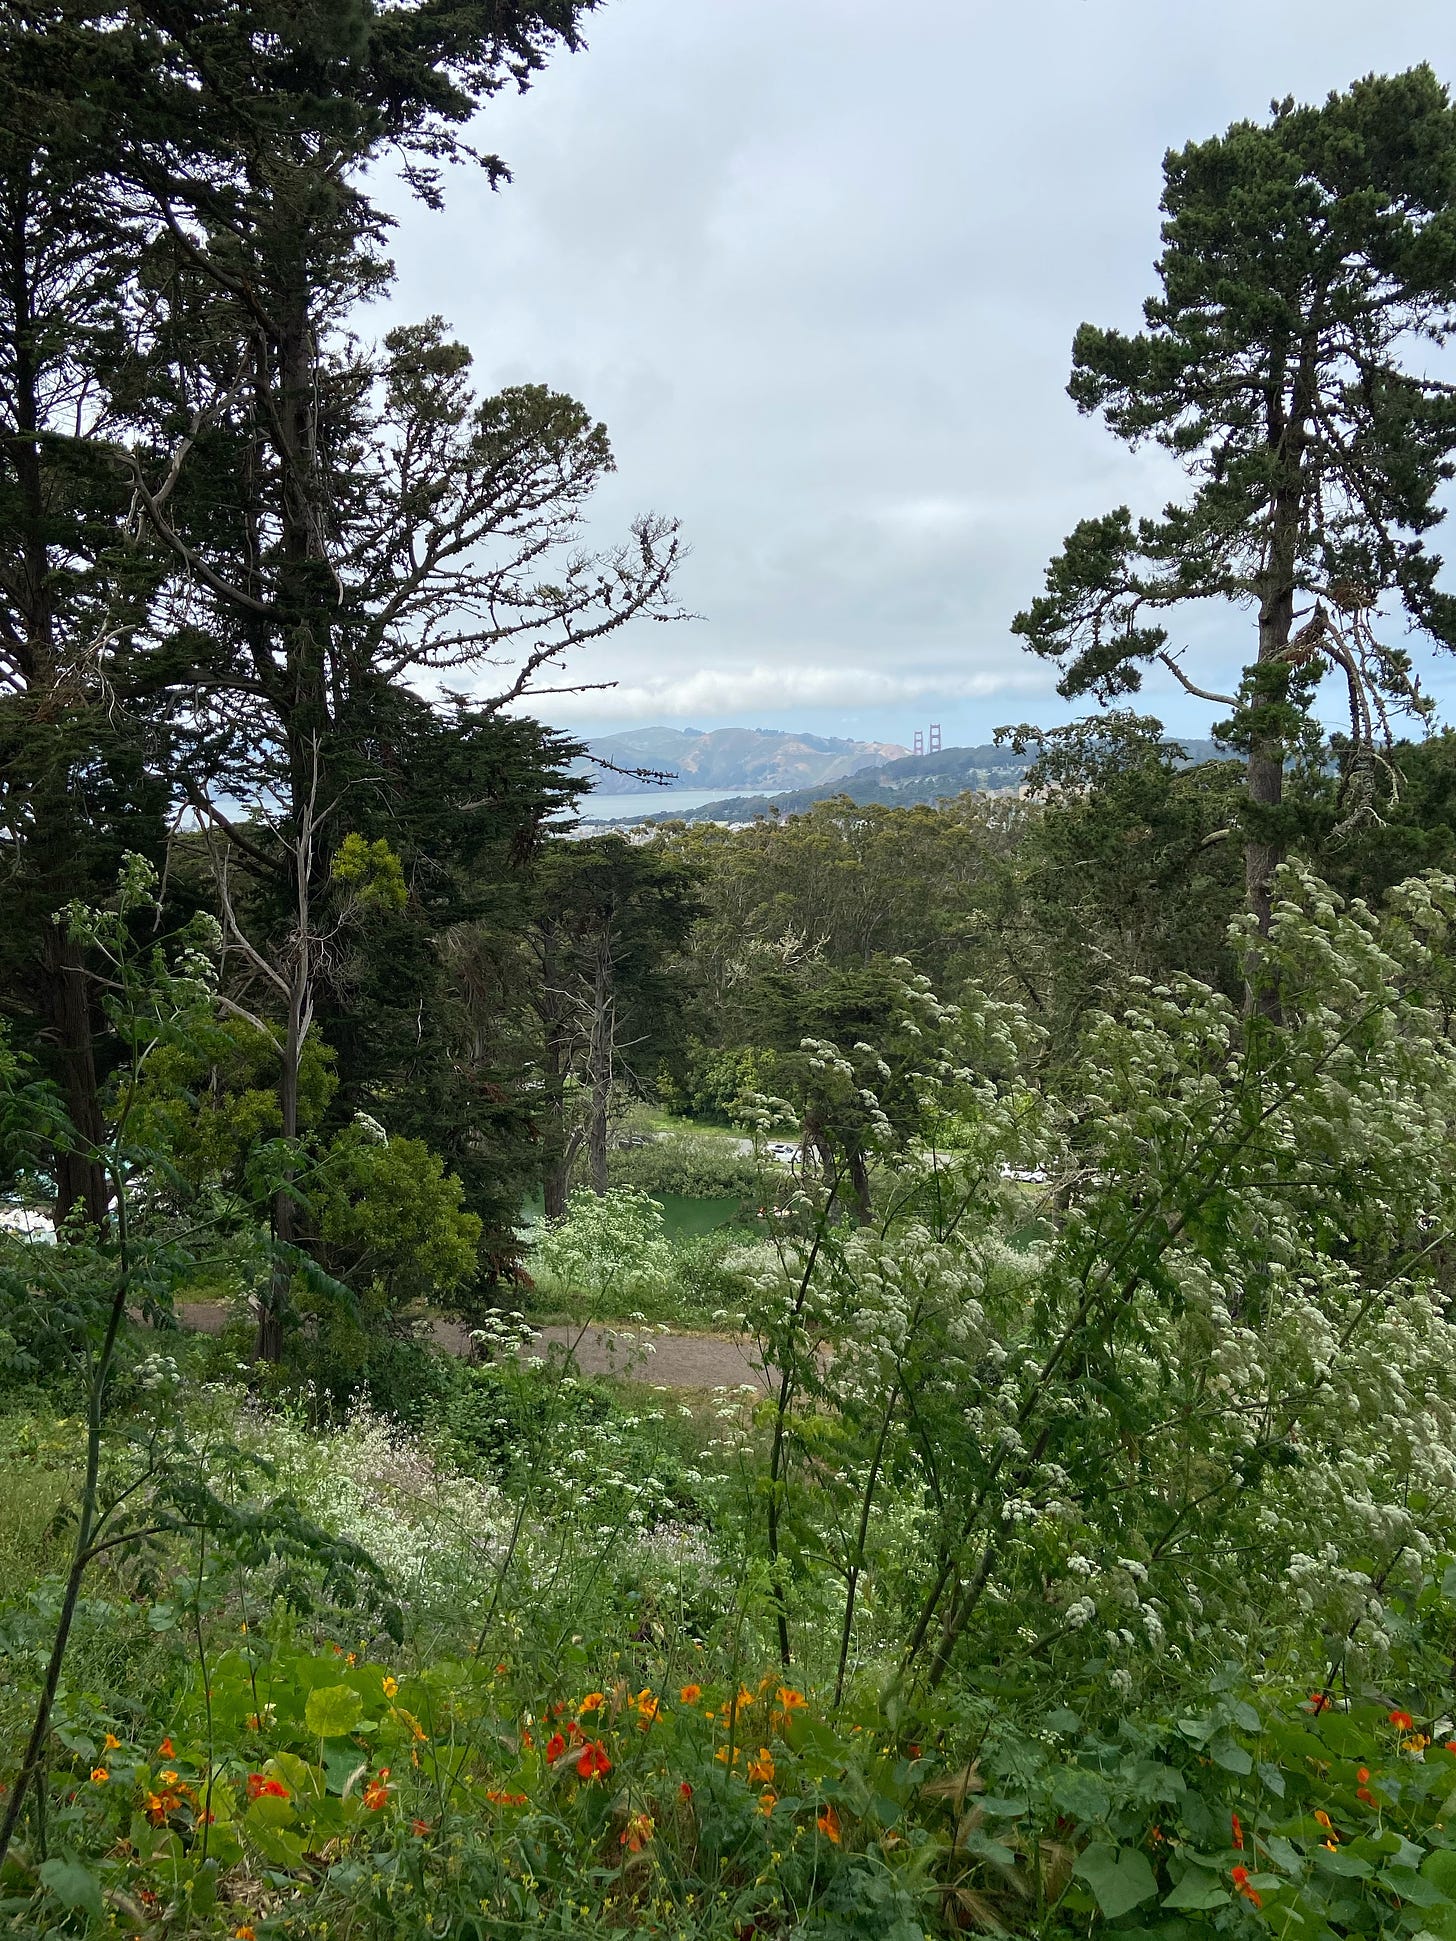 Looking out from the top of a hill surrounding a lake; Golden Gate bridge in the distance. Amy Cowen